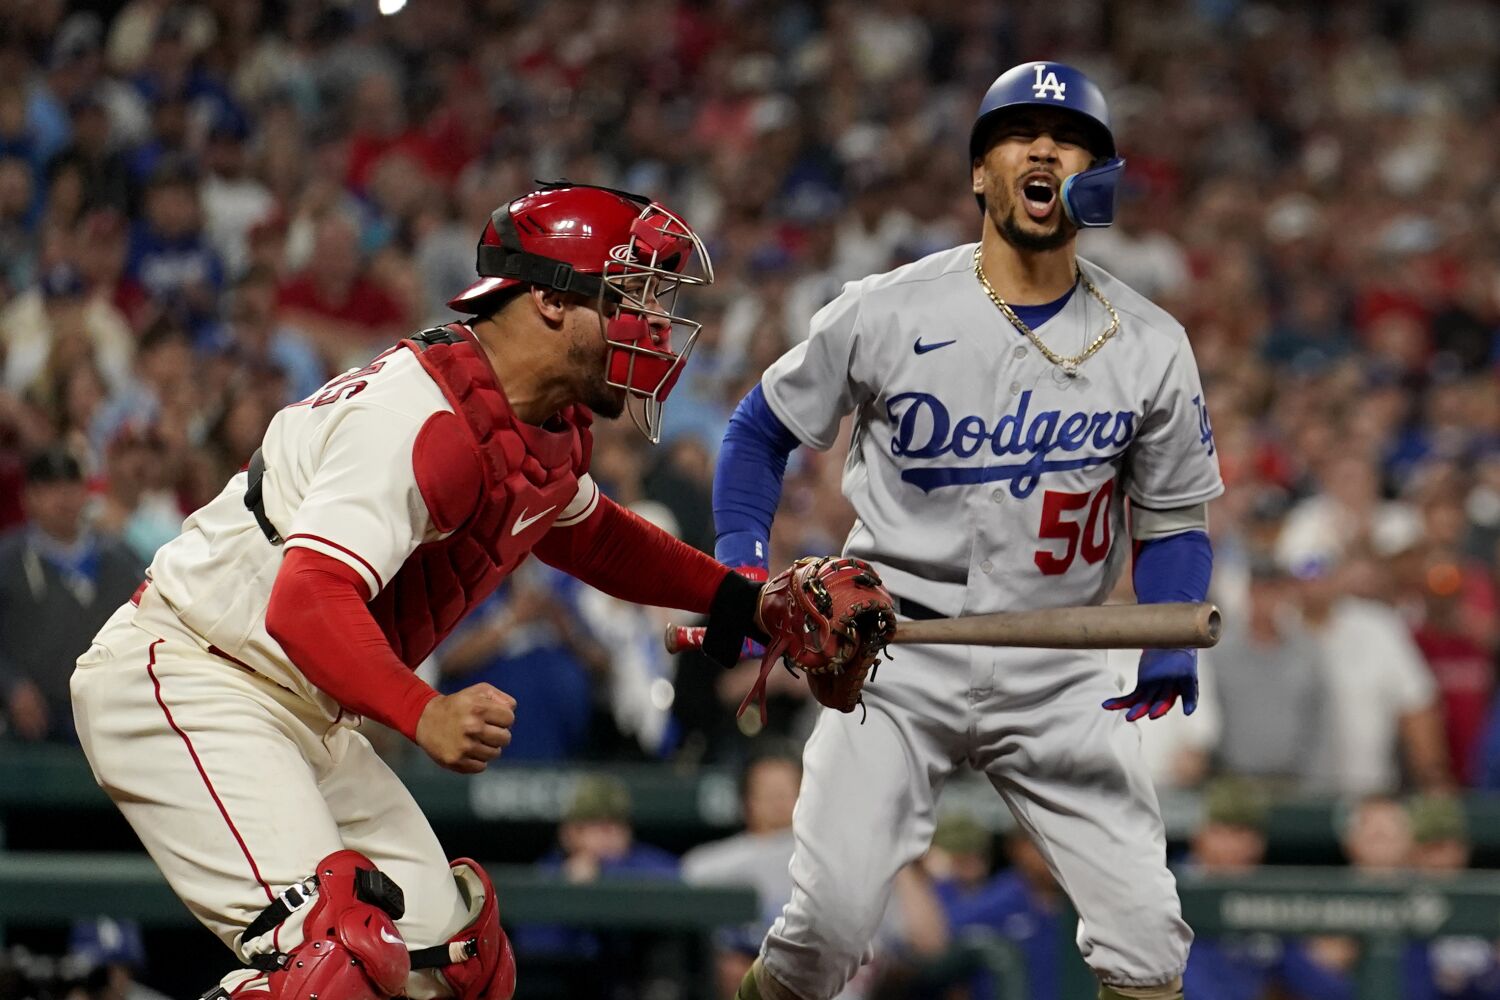 Controversial third strike call dooms Dodgers' comeback bid in loss to Cardinals